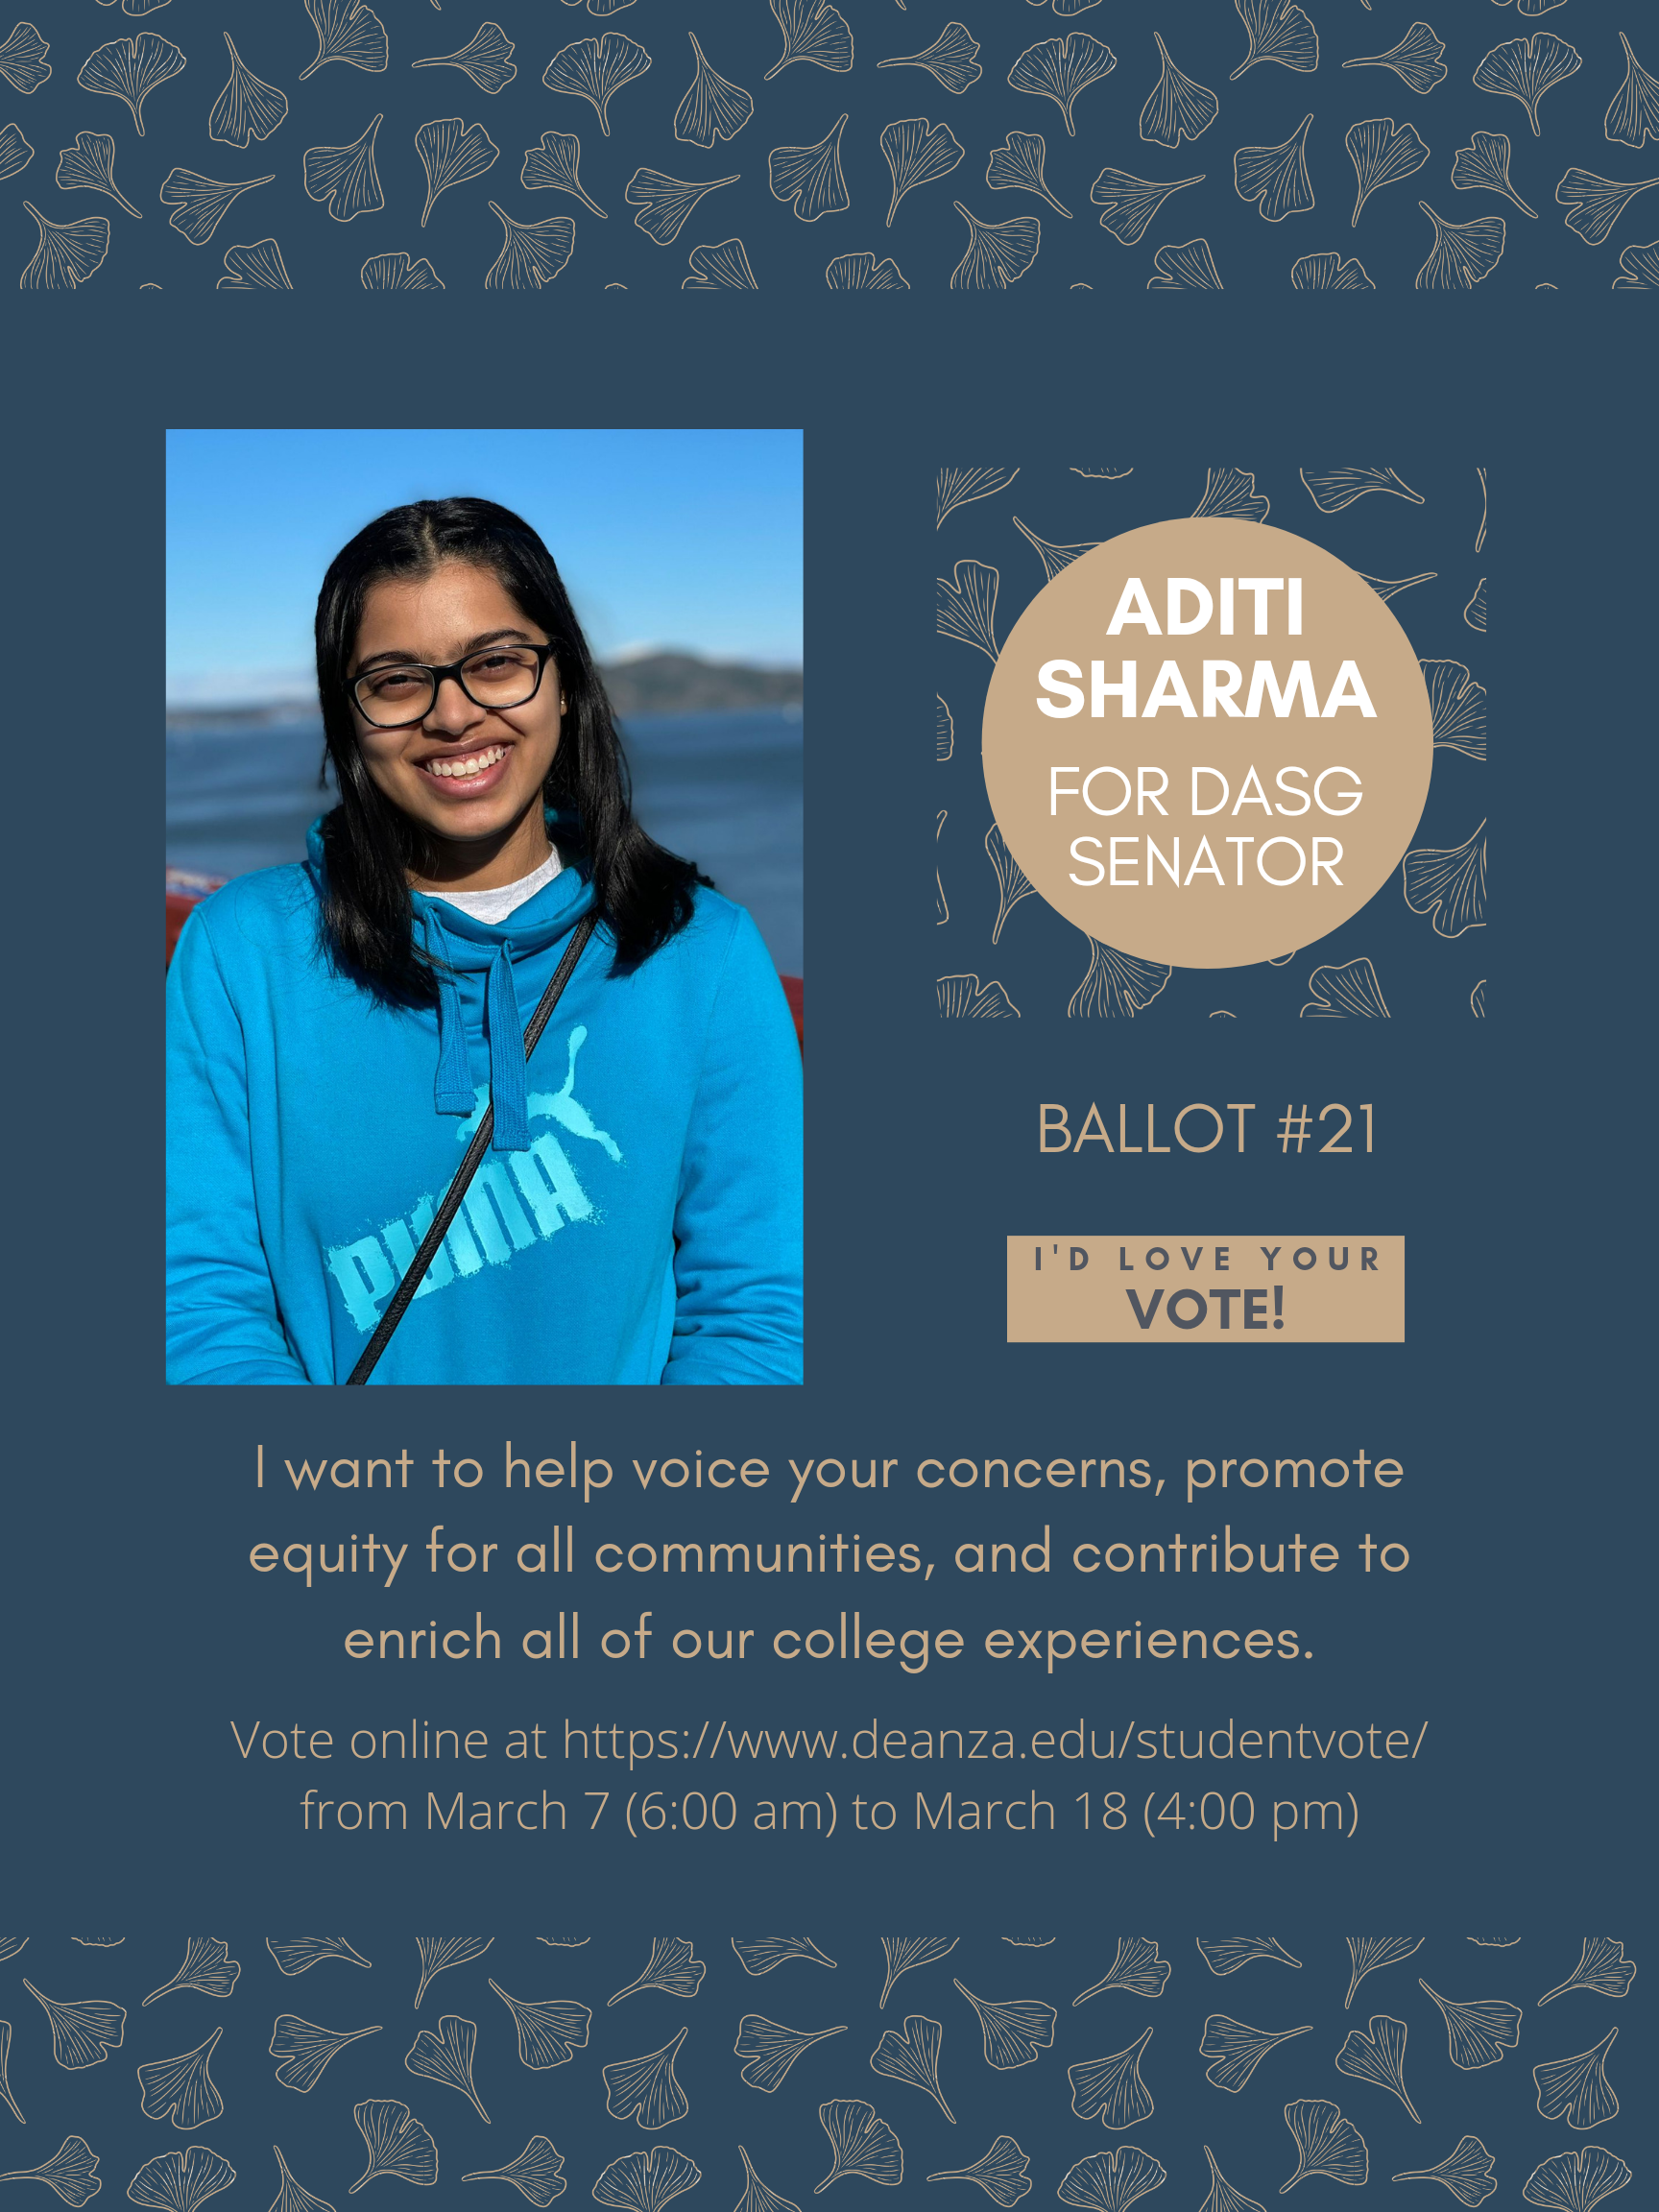 Aditi Sharma for DASG Senator - I'd Love Your Vote! - I want to help voice your concerns, promote equity for all communities, and contribute to enrich all of our college experiences.